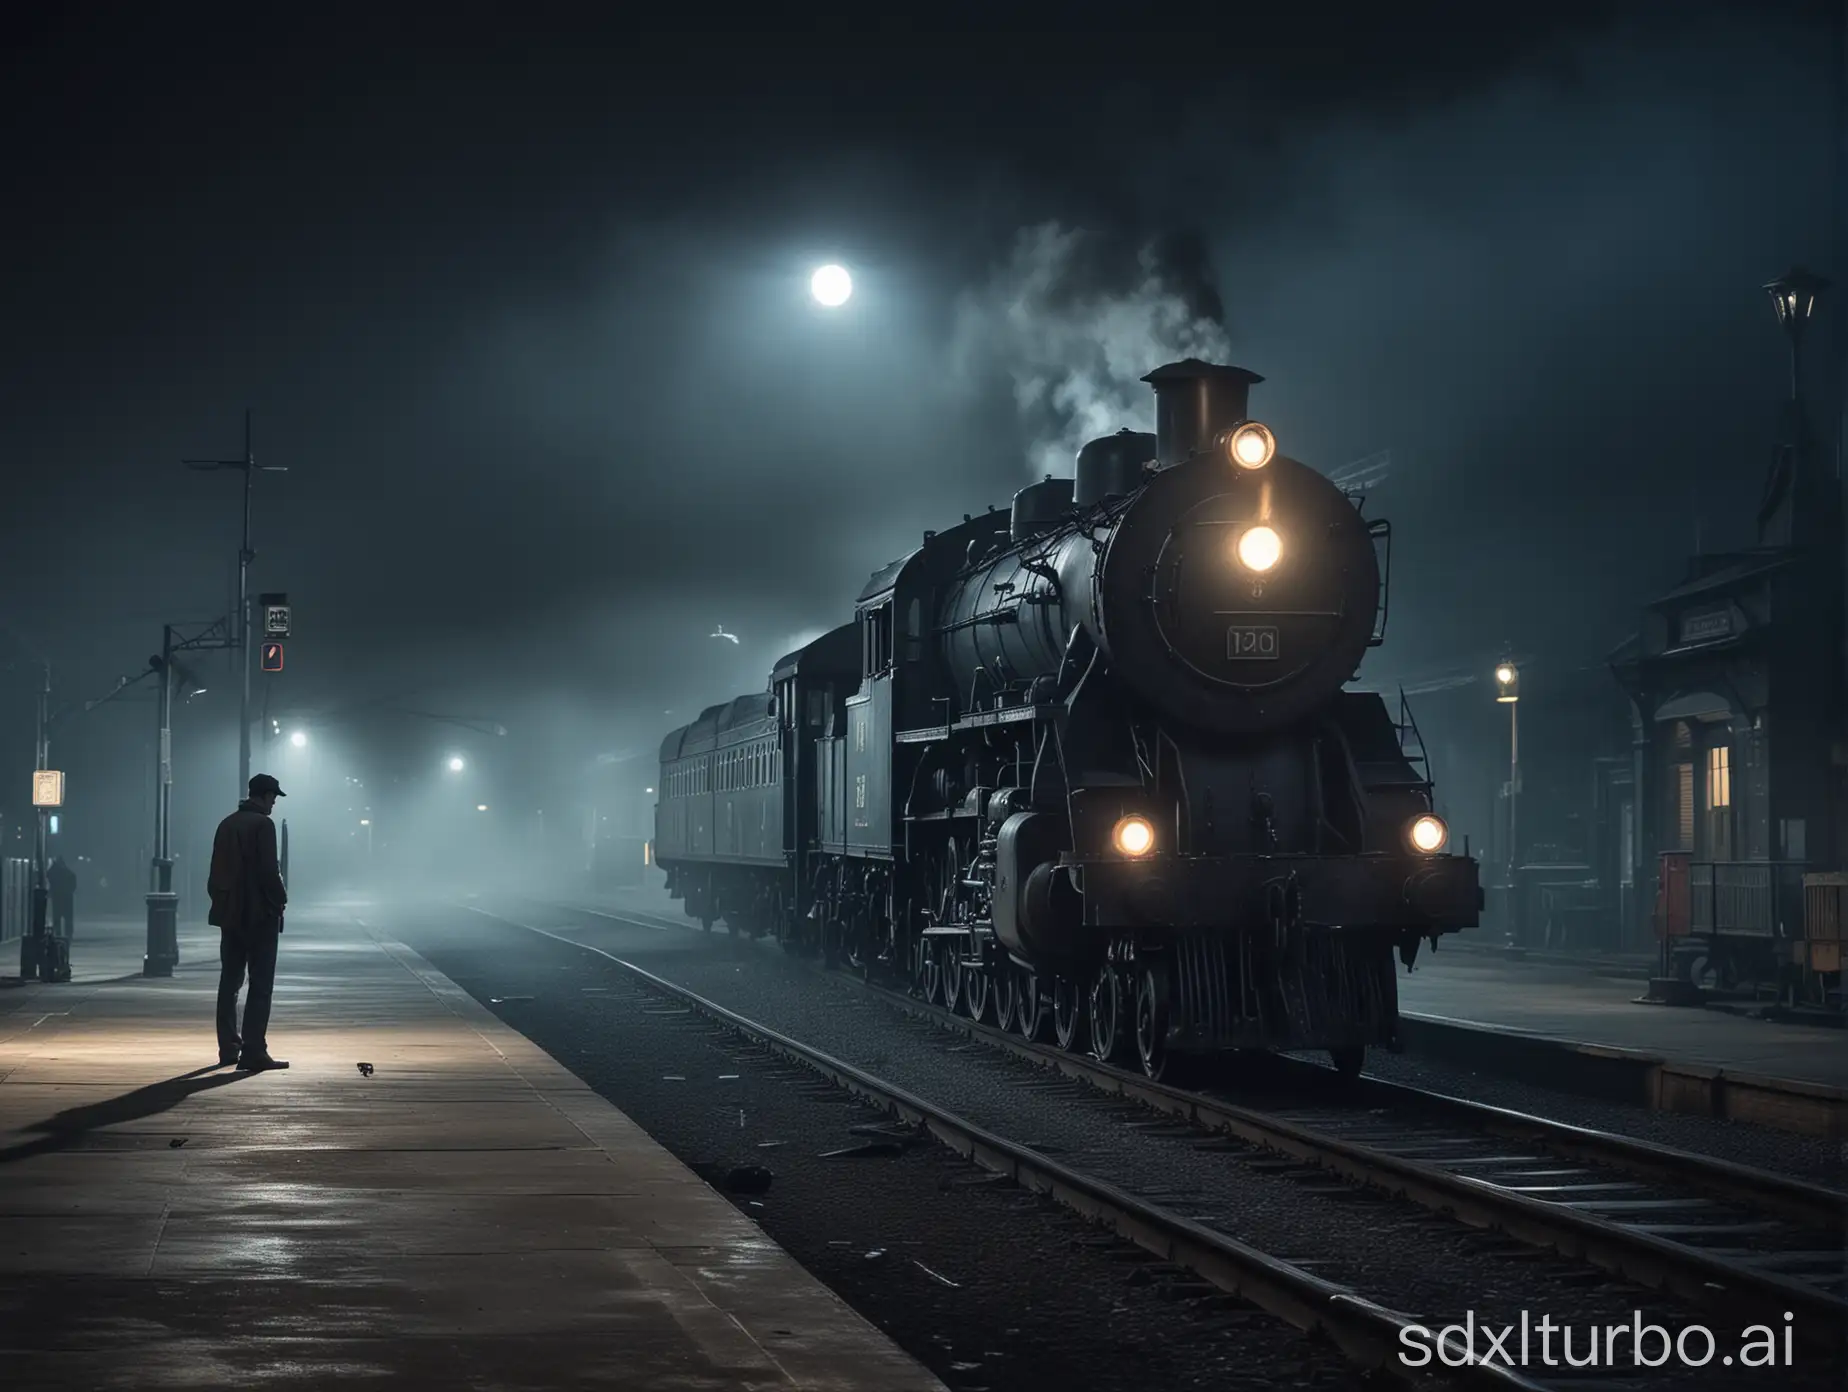 A man  stands at a deserted train station platform. A vintage locomotive with glowing headlights chugs in, a dim moonlit scene, a bluish tone of visual, a half moon, each passing window revealing a scene from his past with his love. The journey ends abruptly, depositing him back in the present, the platform empty and cold.